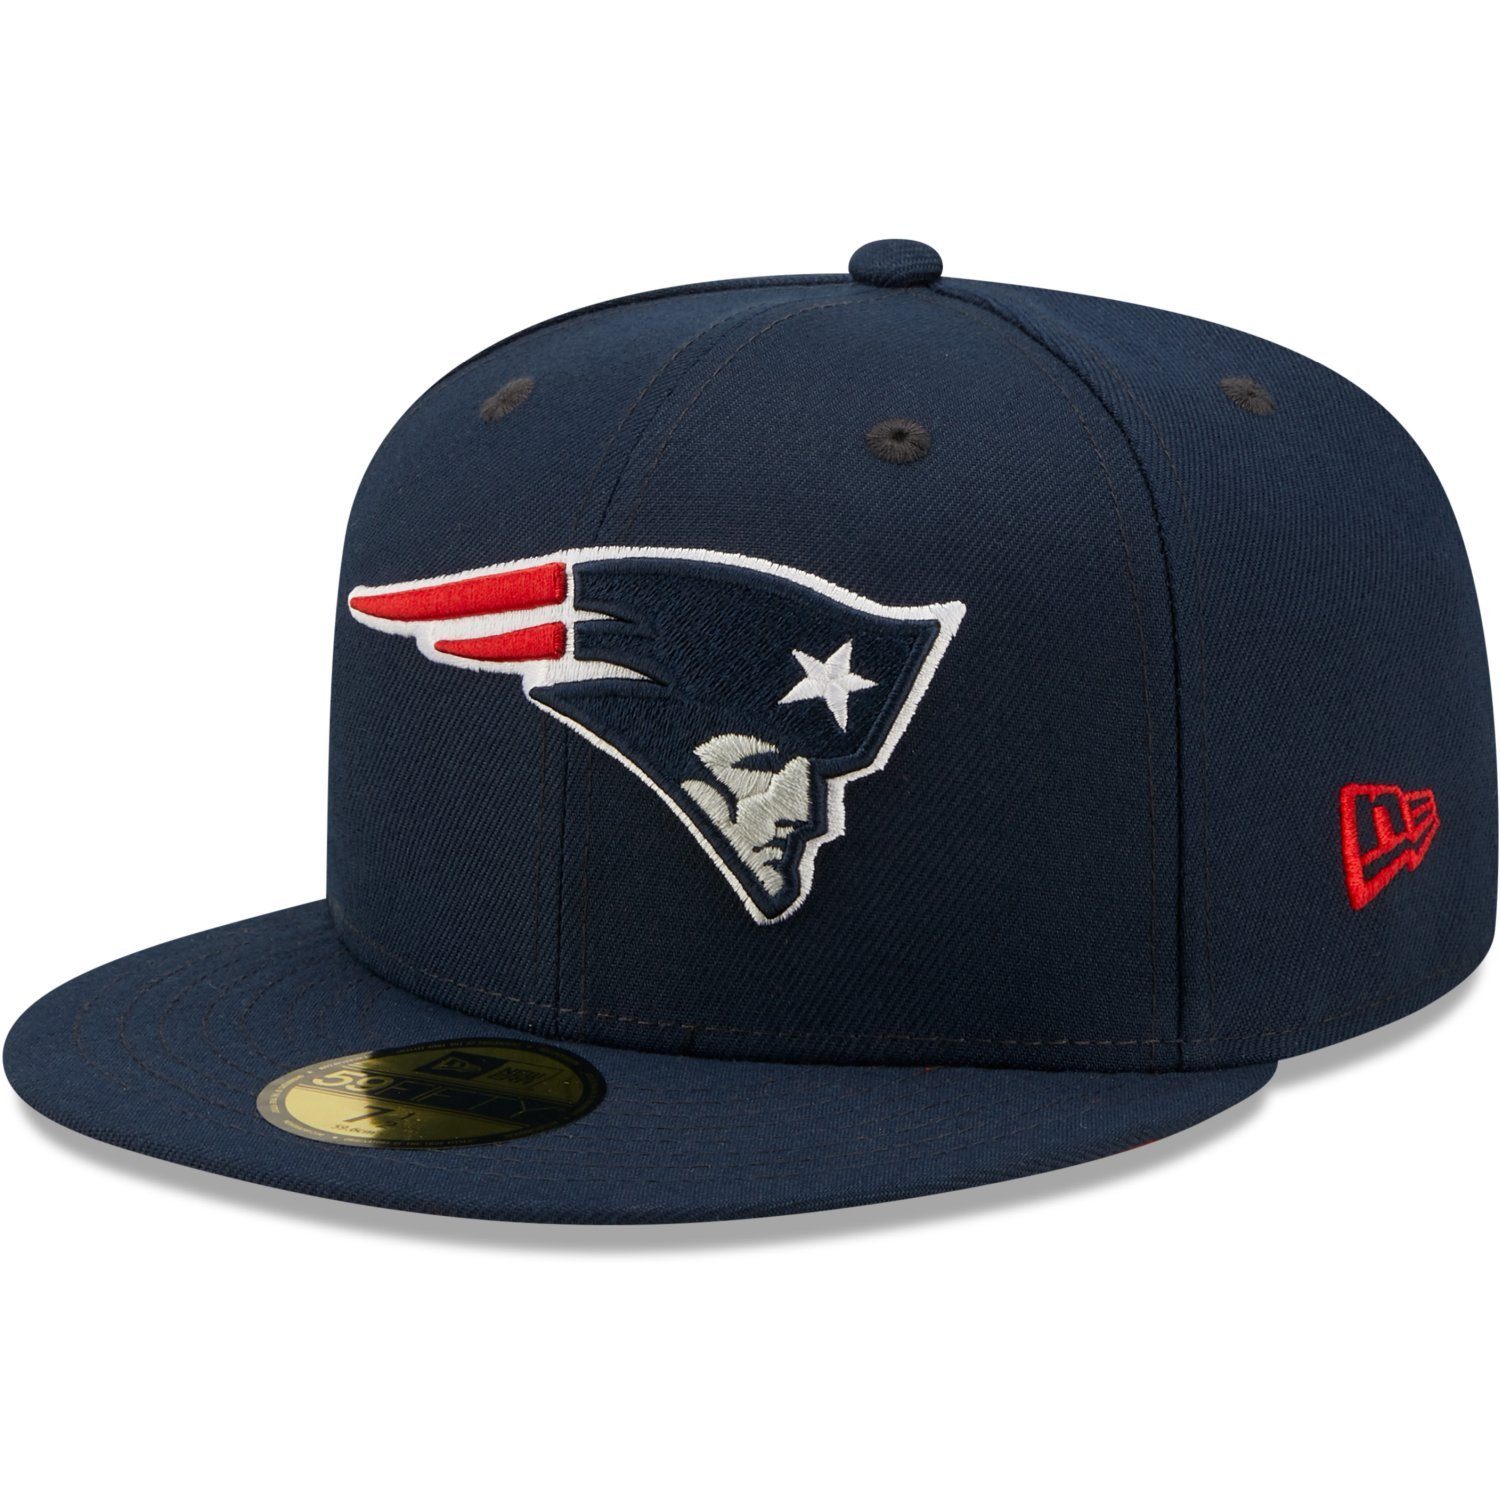 England 59Fifty New New 50 Patriots Era Fitted Cap Years